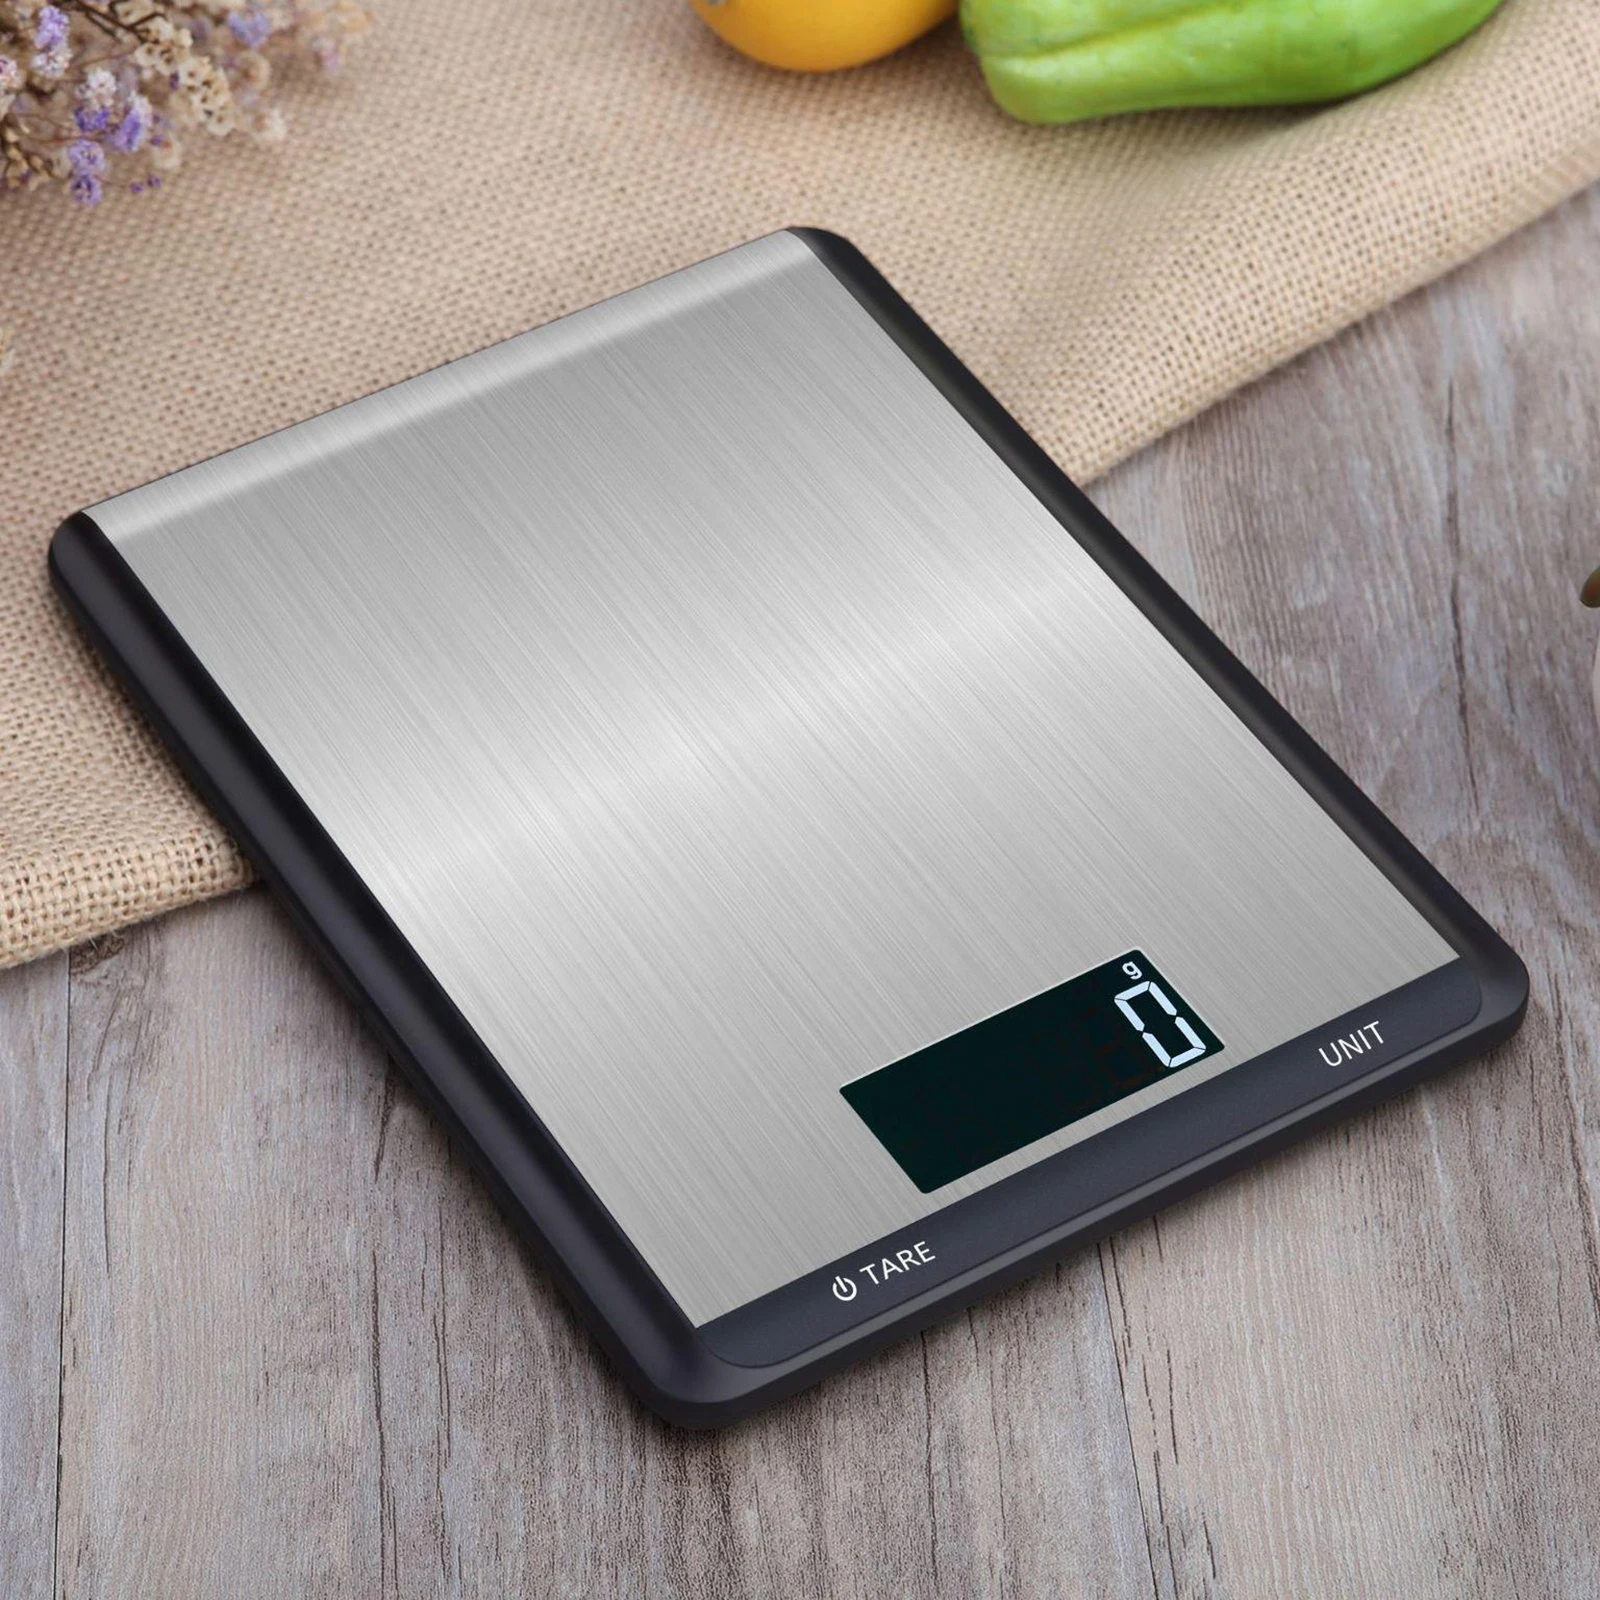 10 kg digital food stainless steel kitchen scale for meal preparation